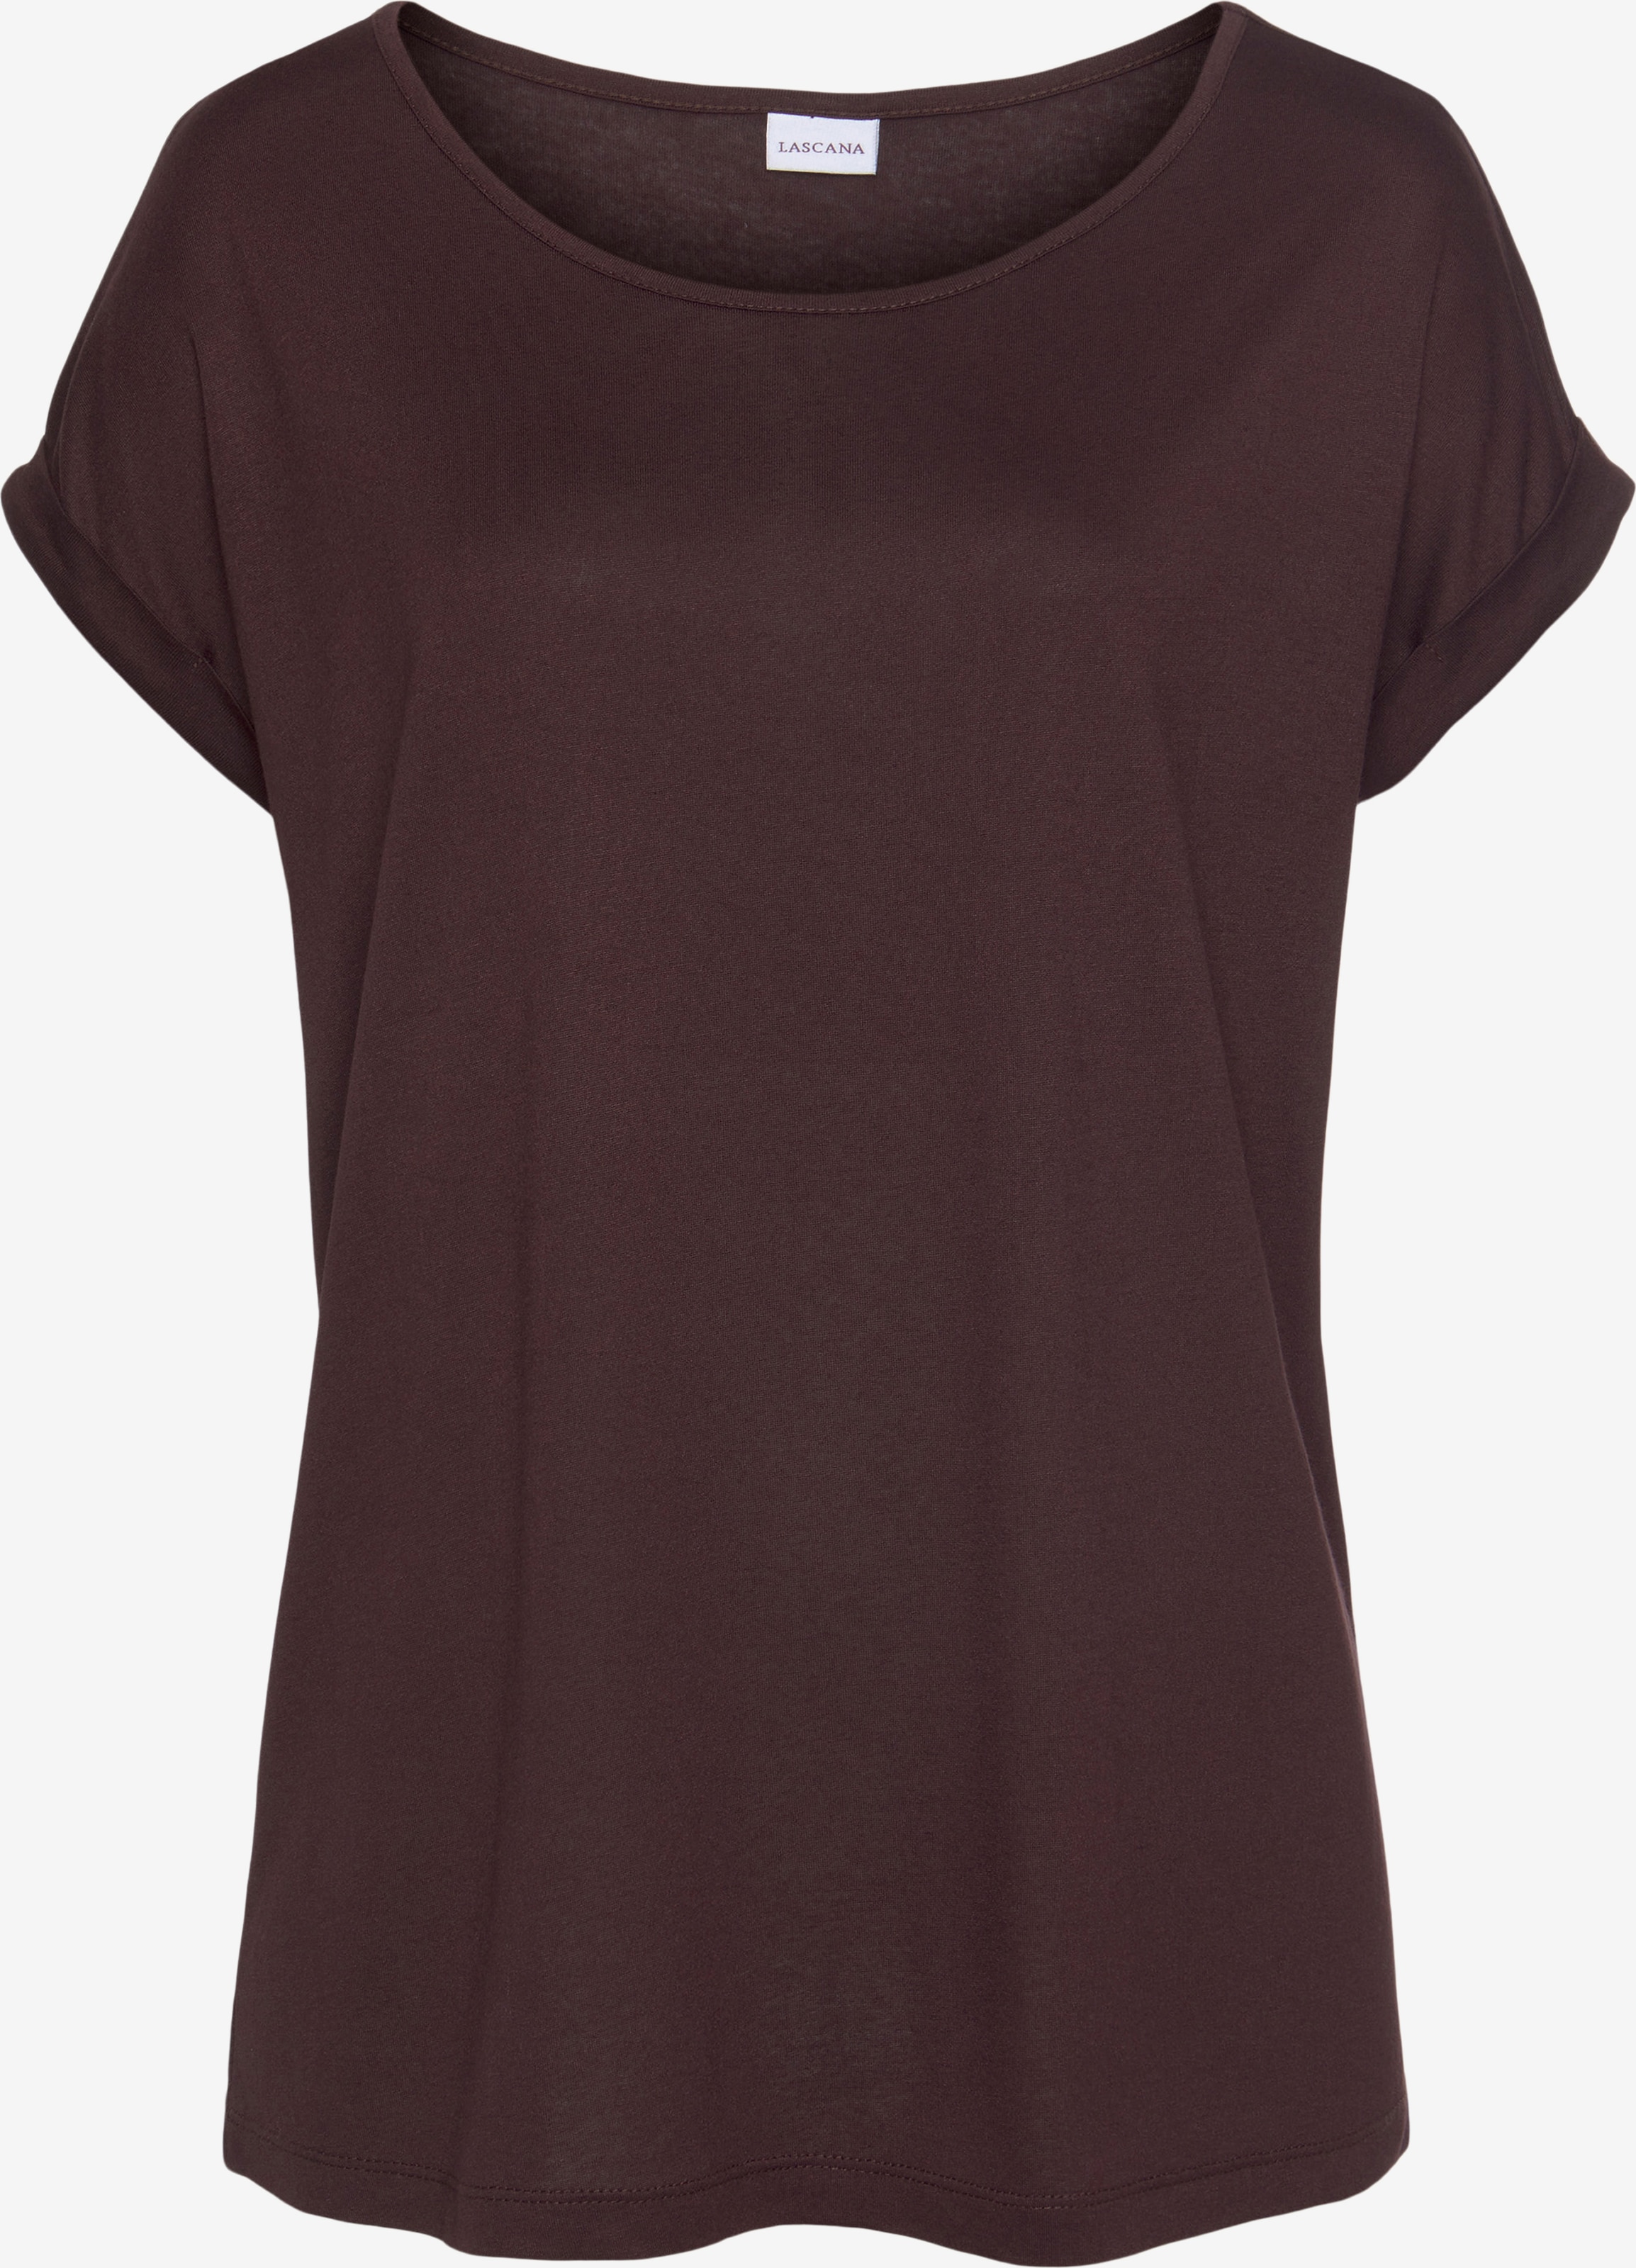 Aubergine in YOU | ABOUT Shirt LASCANA